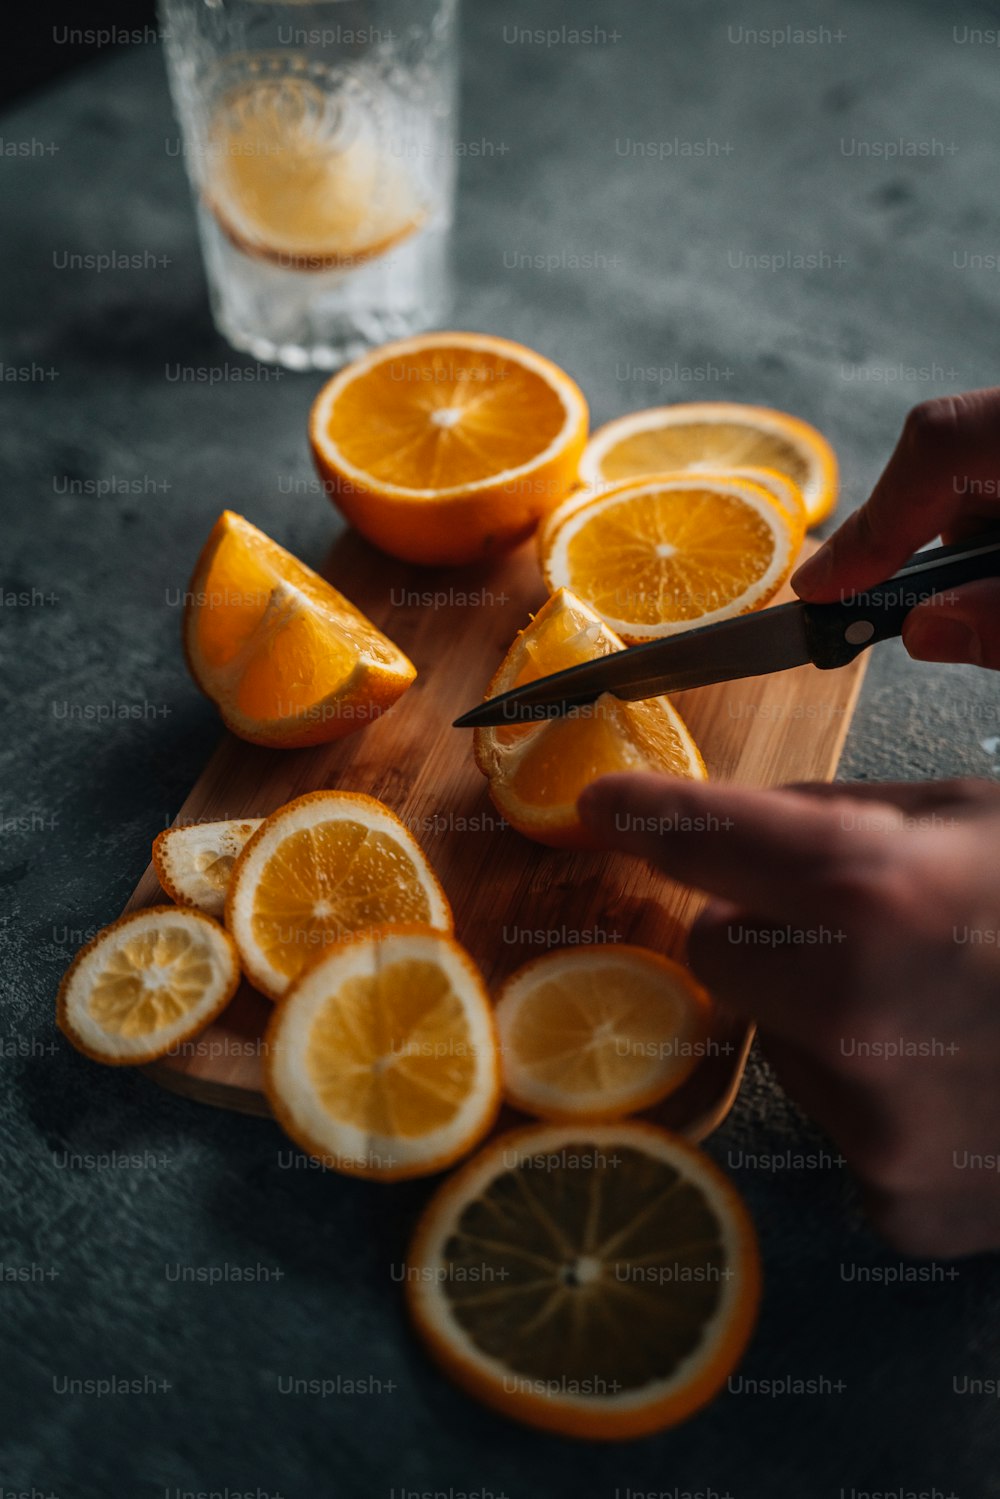 a person cutting up oranges on a cutting board